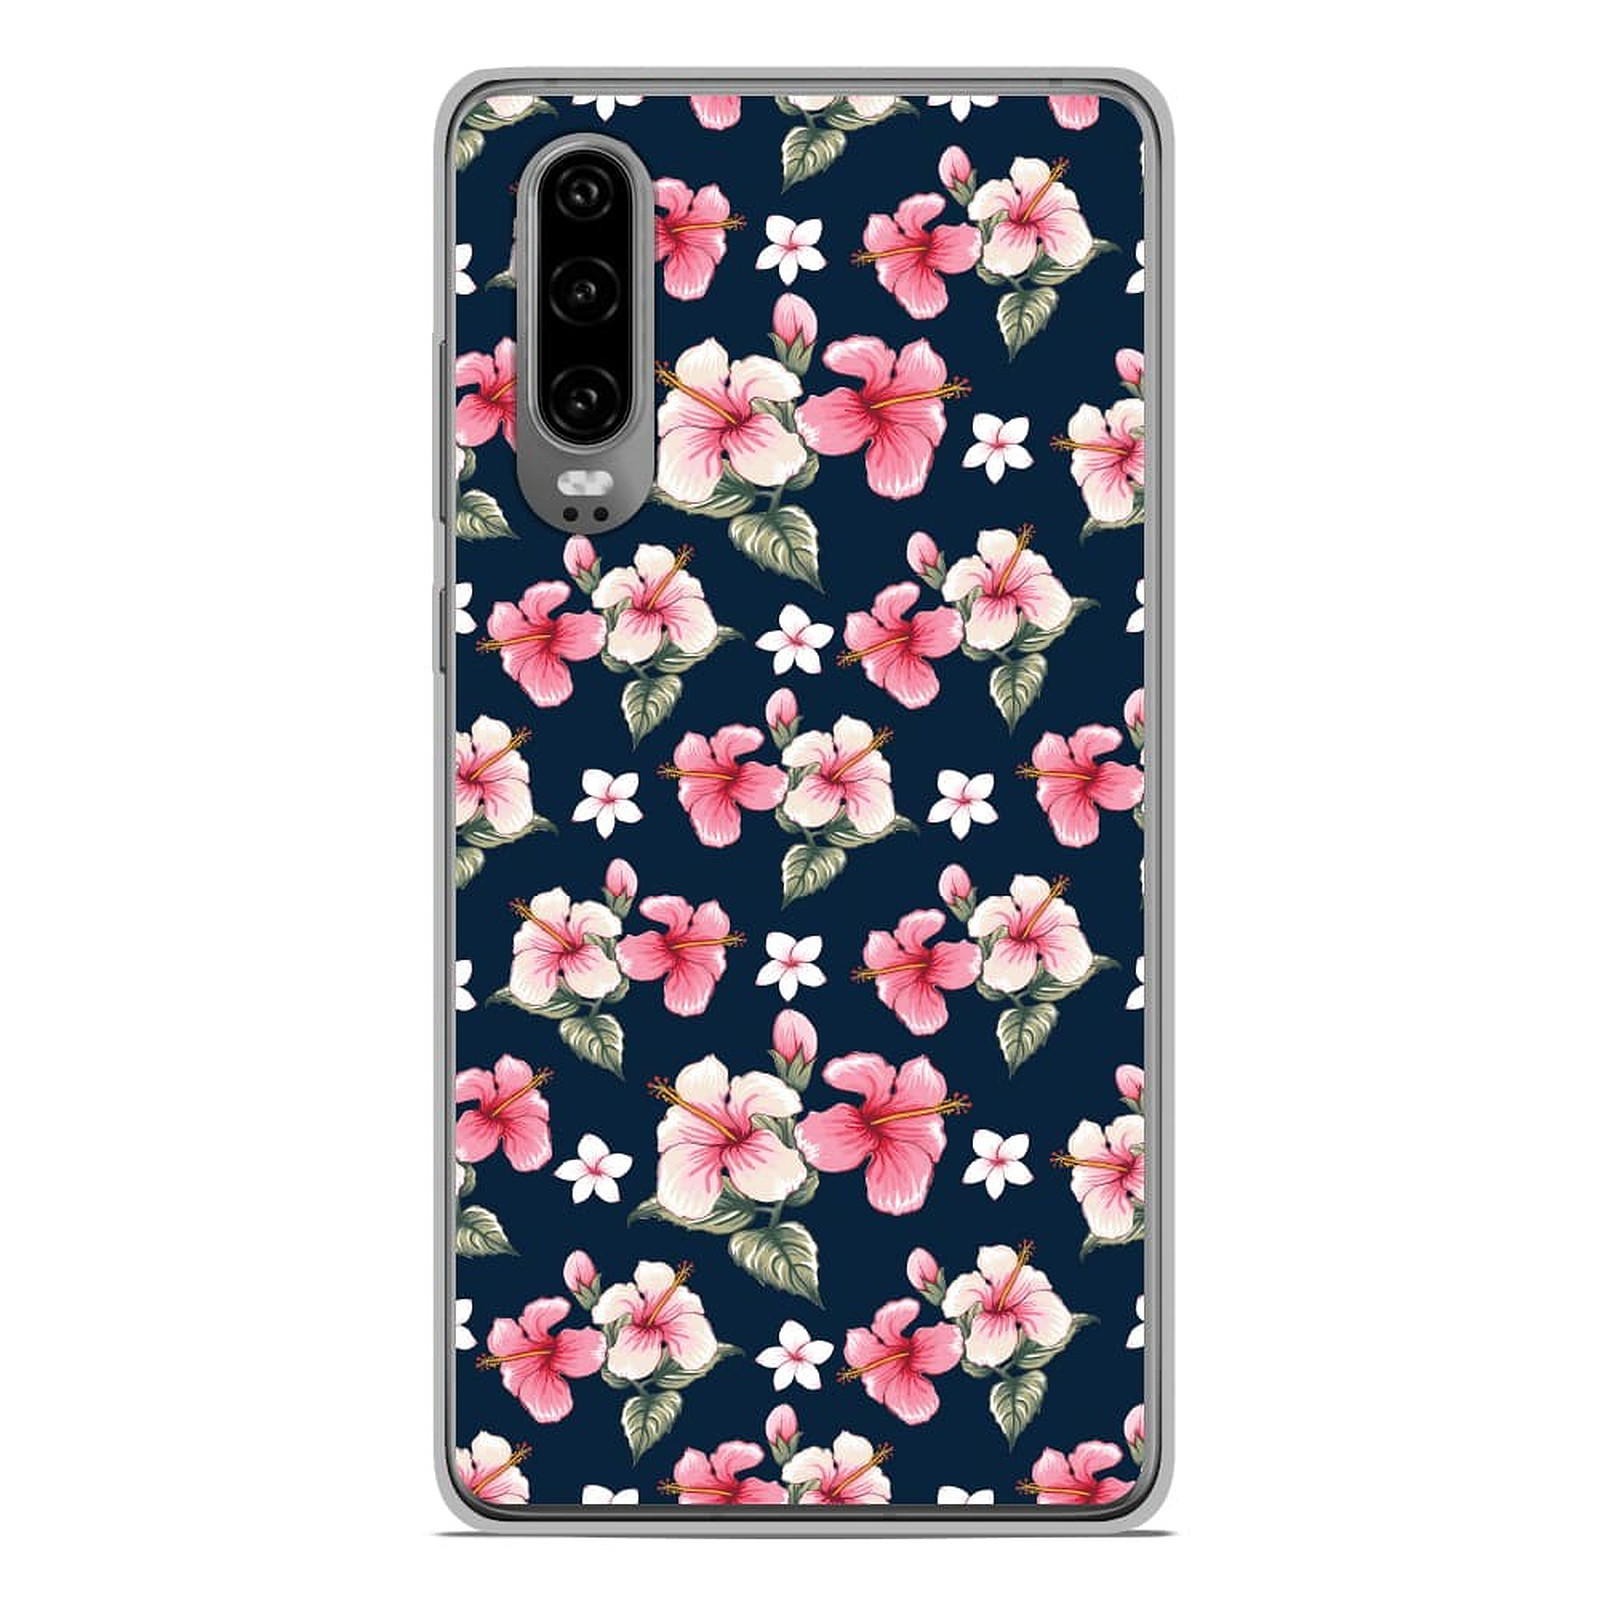 1001 Coques Coque silicone gel Huawei P30 motif Hibiscus Vintage - Coque telephone 1001Coques